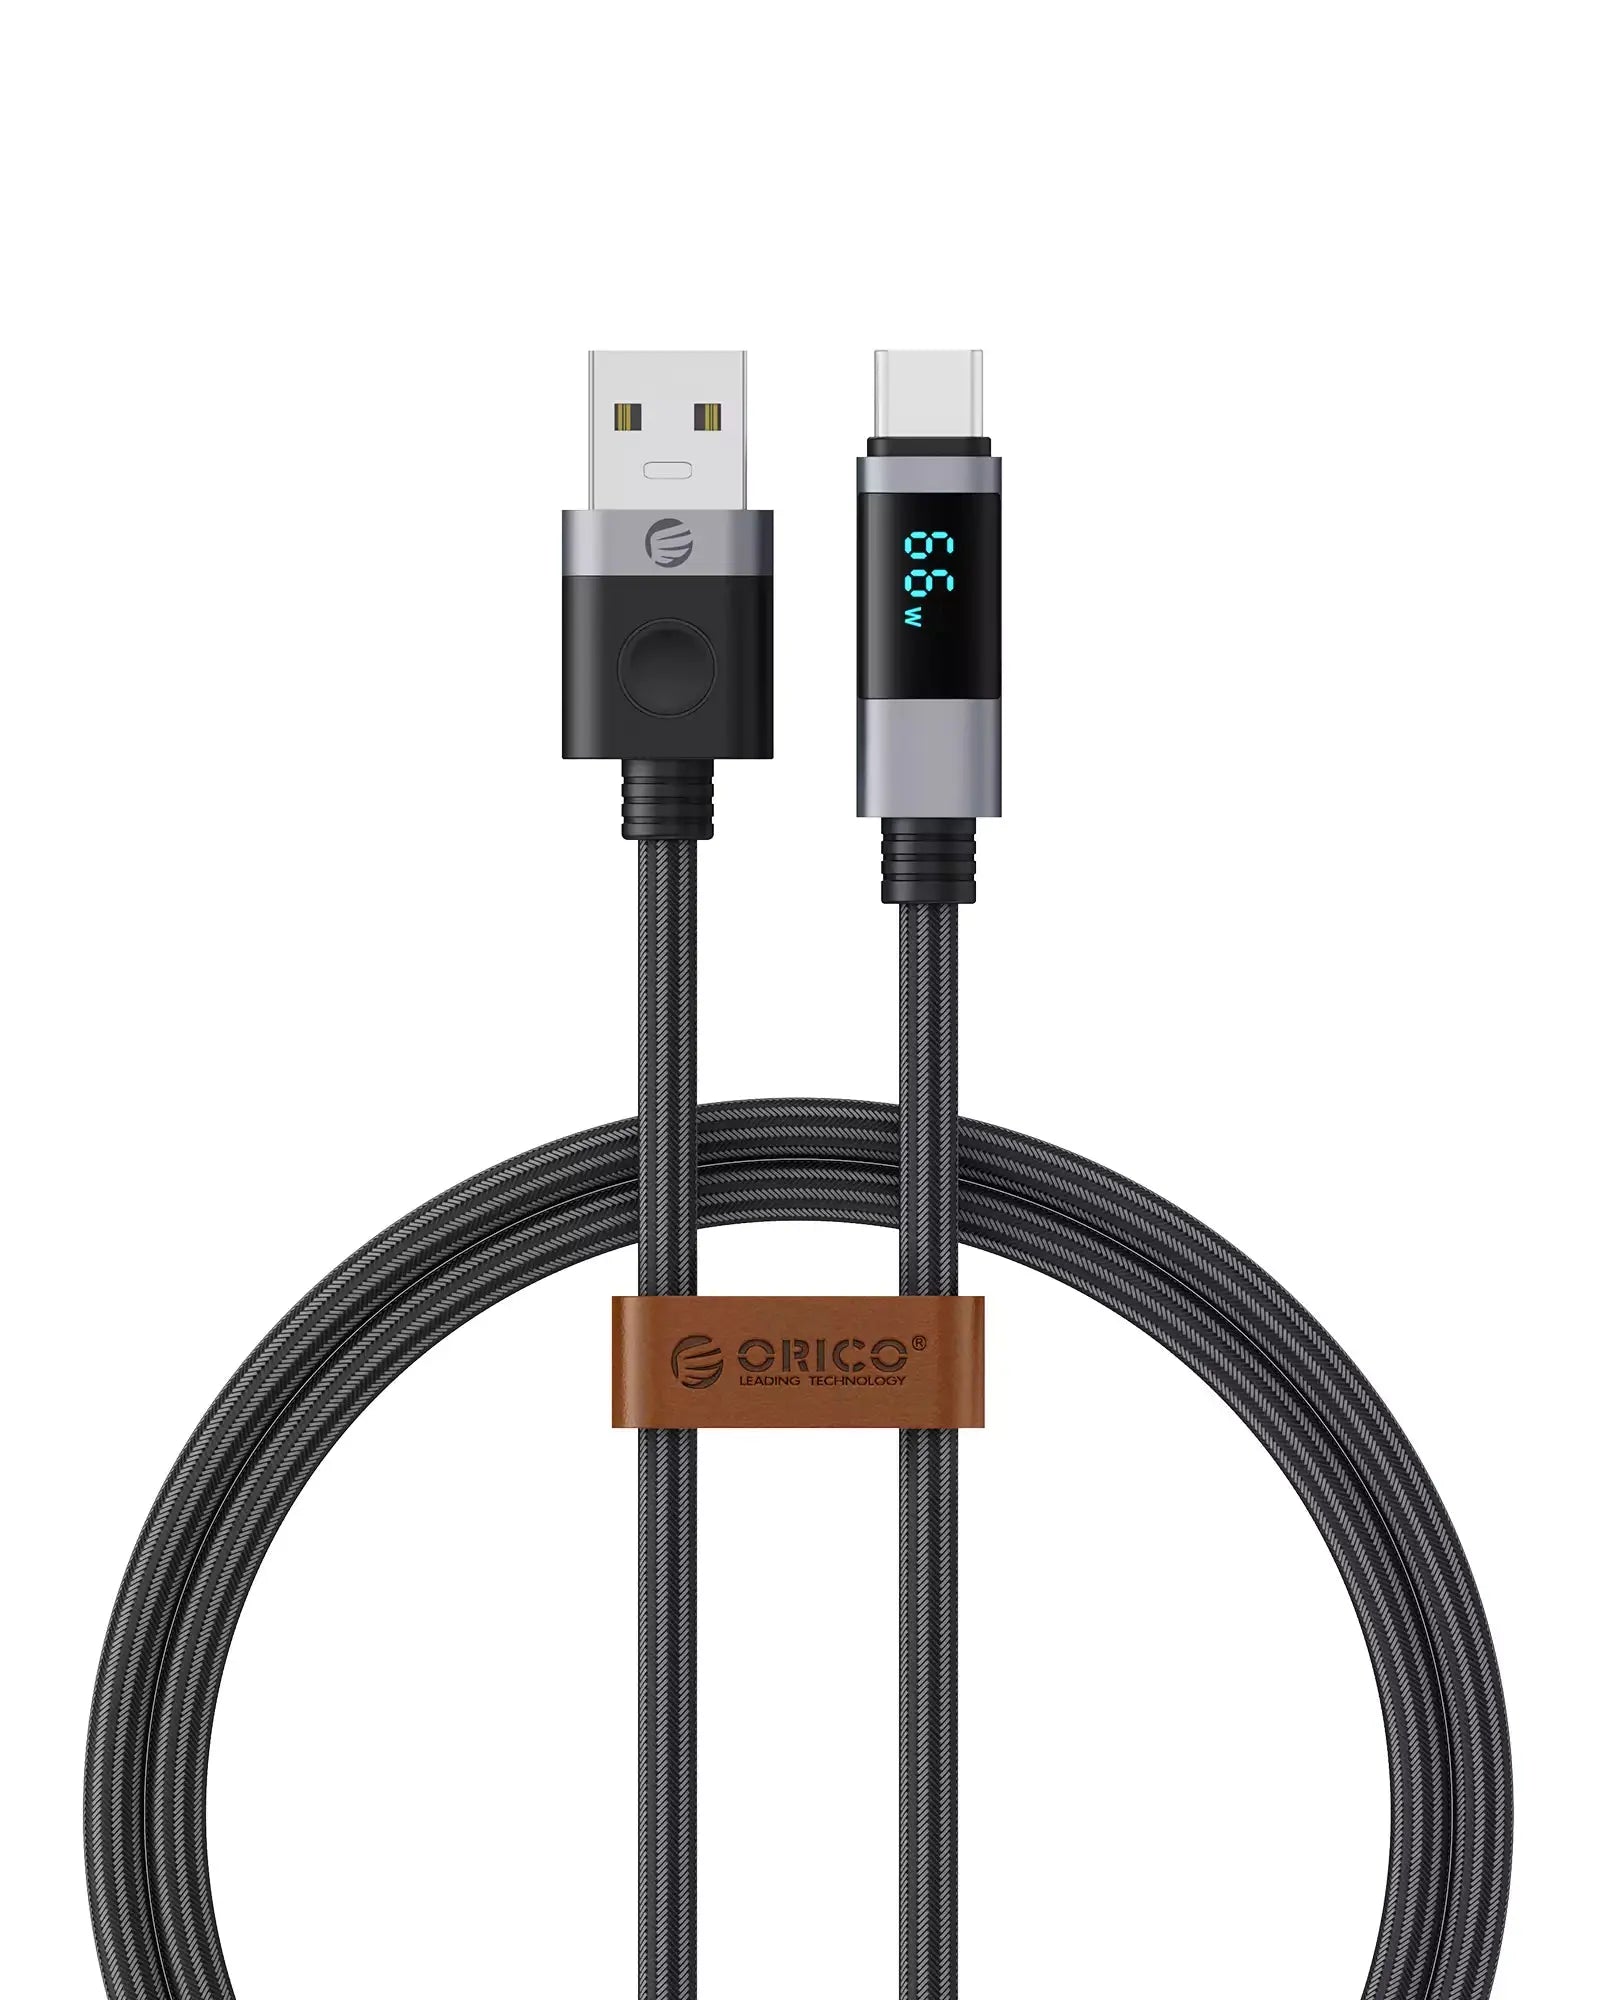 ORICO USB-C to USB-A, 29W PD LED Display Fast Cable Orico